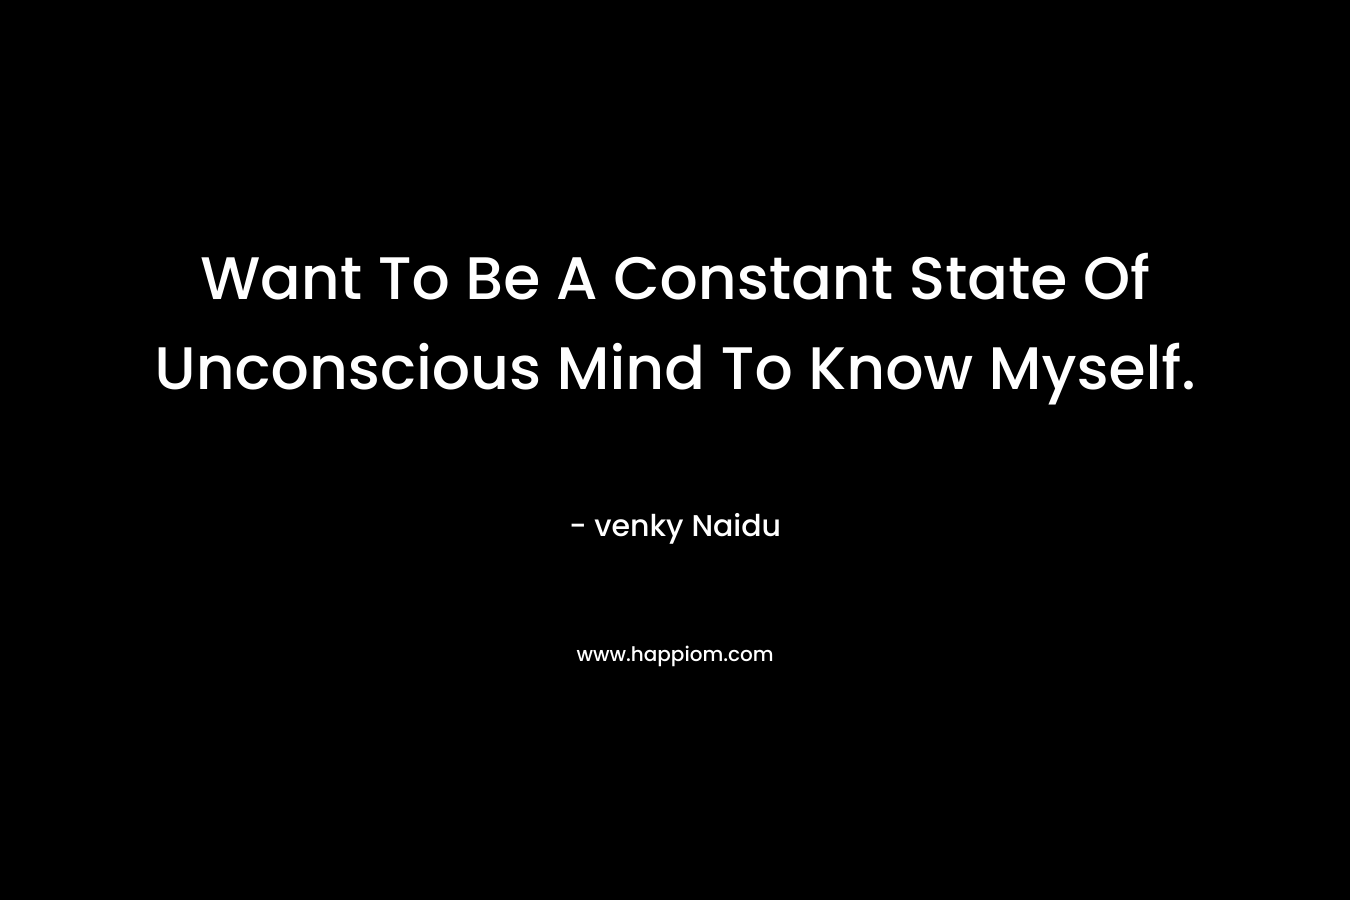 Want To Be A Constant State Of Unconscious Mind To Know Myself.